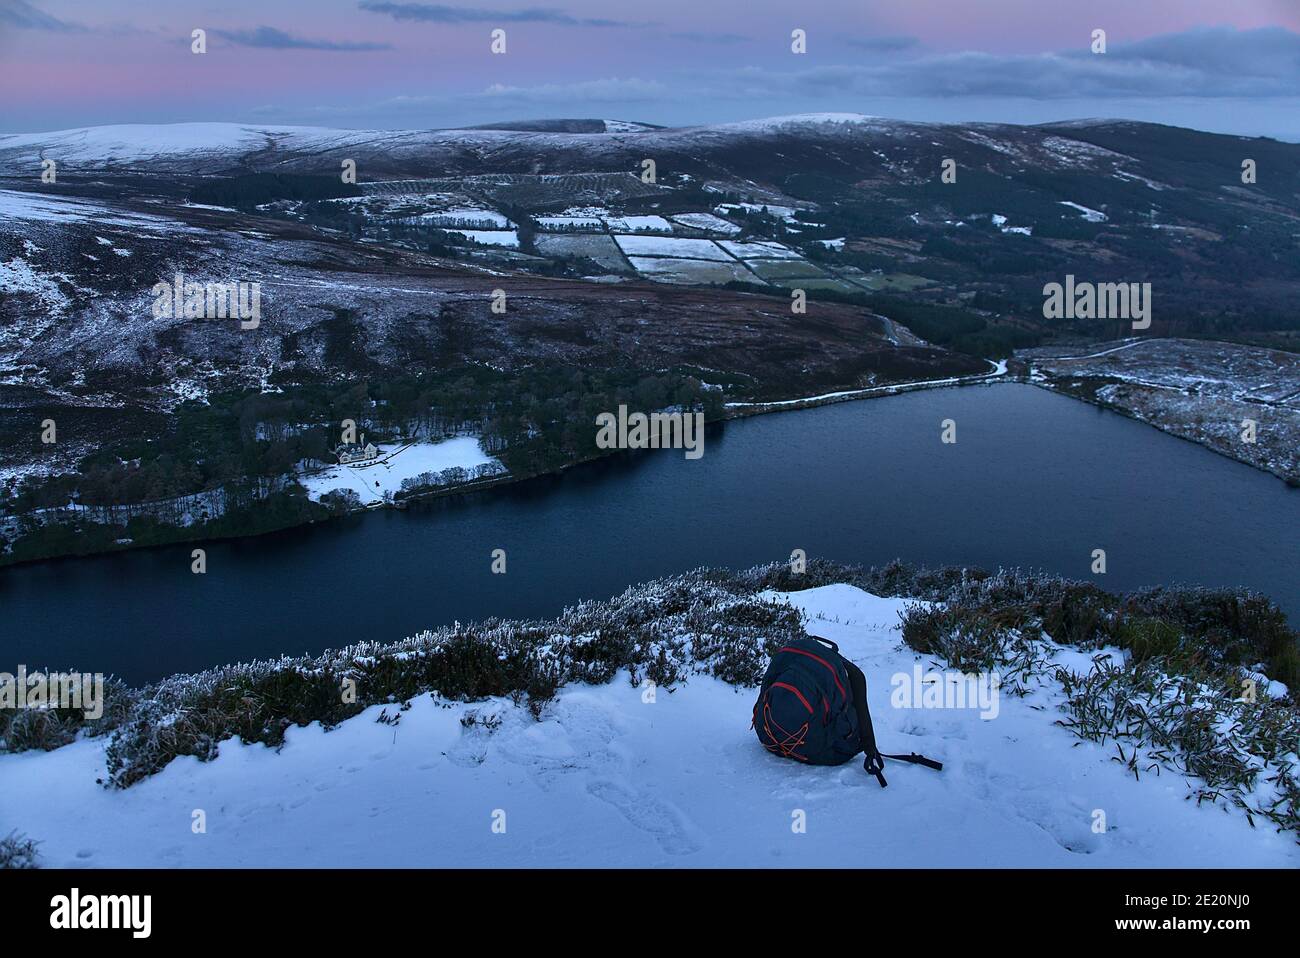 Scenic evening view over Lough Bray Upper lake seen from Eagles Crag, Ballylerane, Co. Wicklow, Ireland. Travel rucksack in foreground Stock Photo